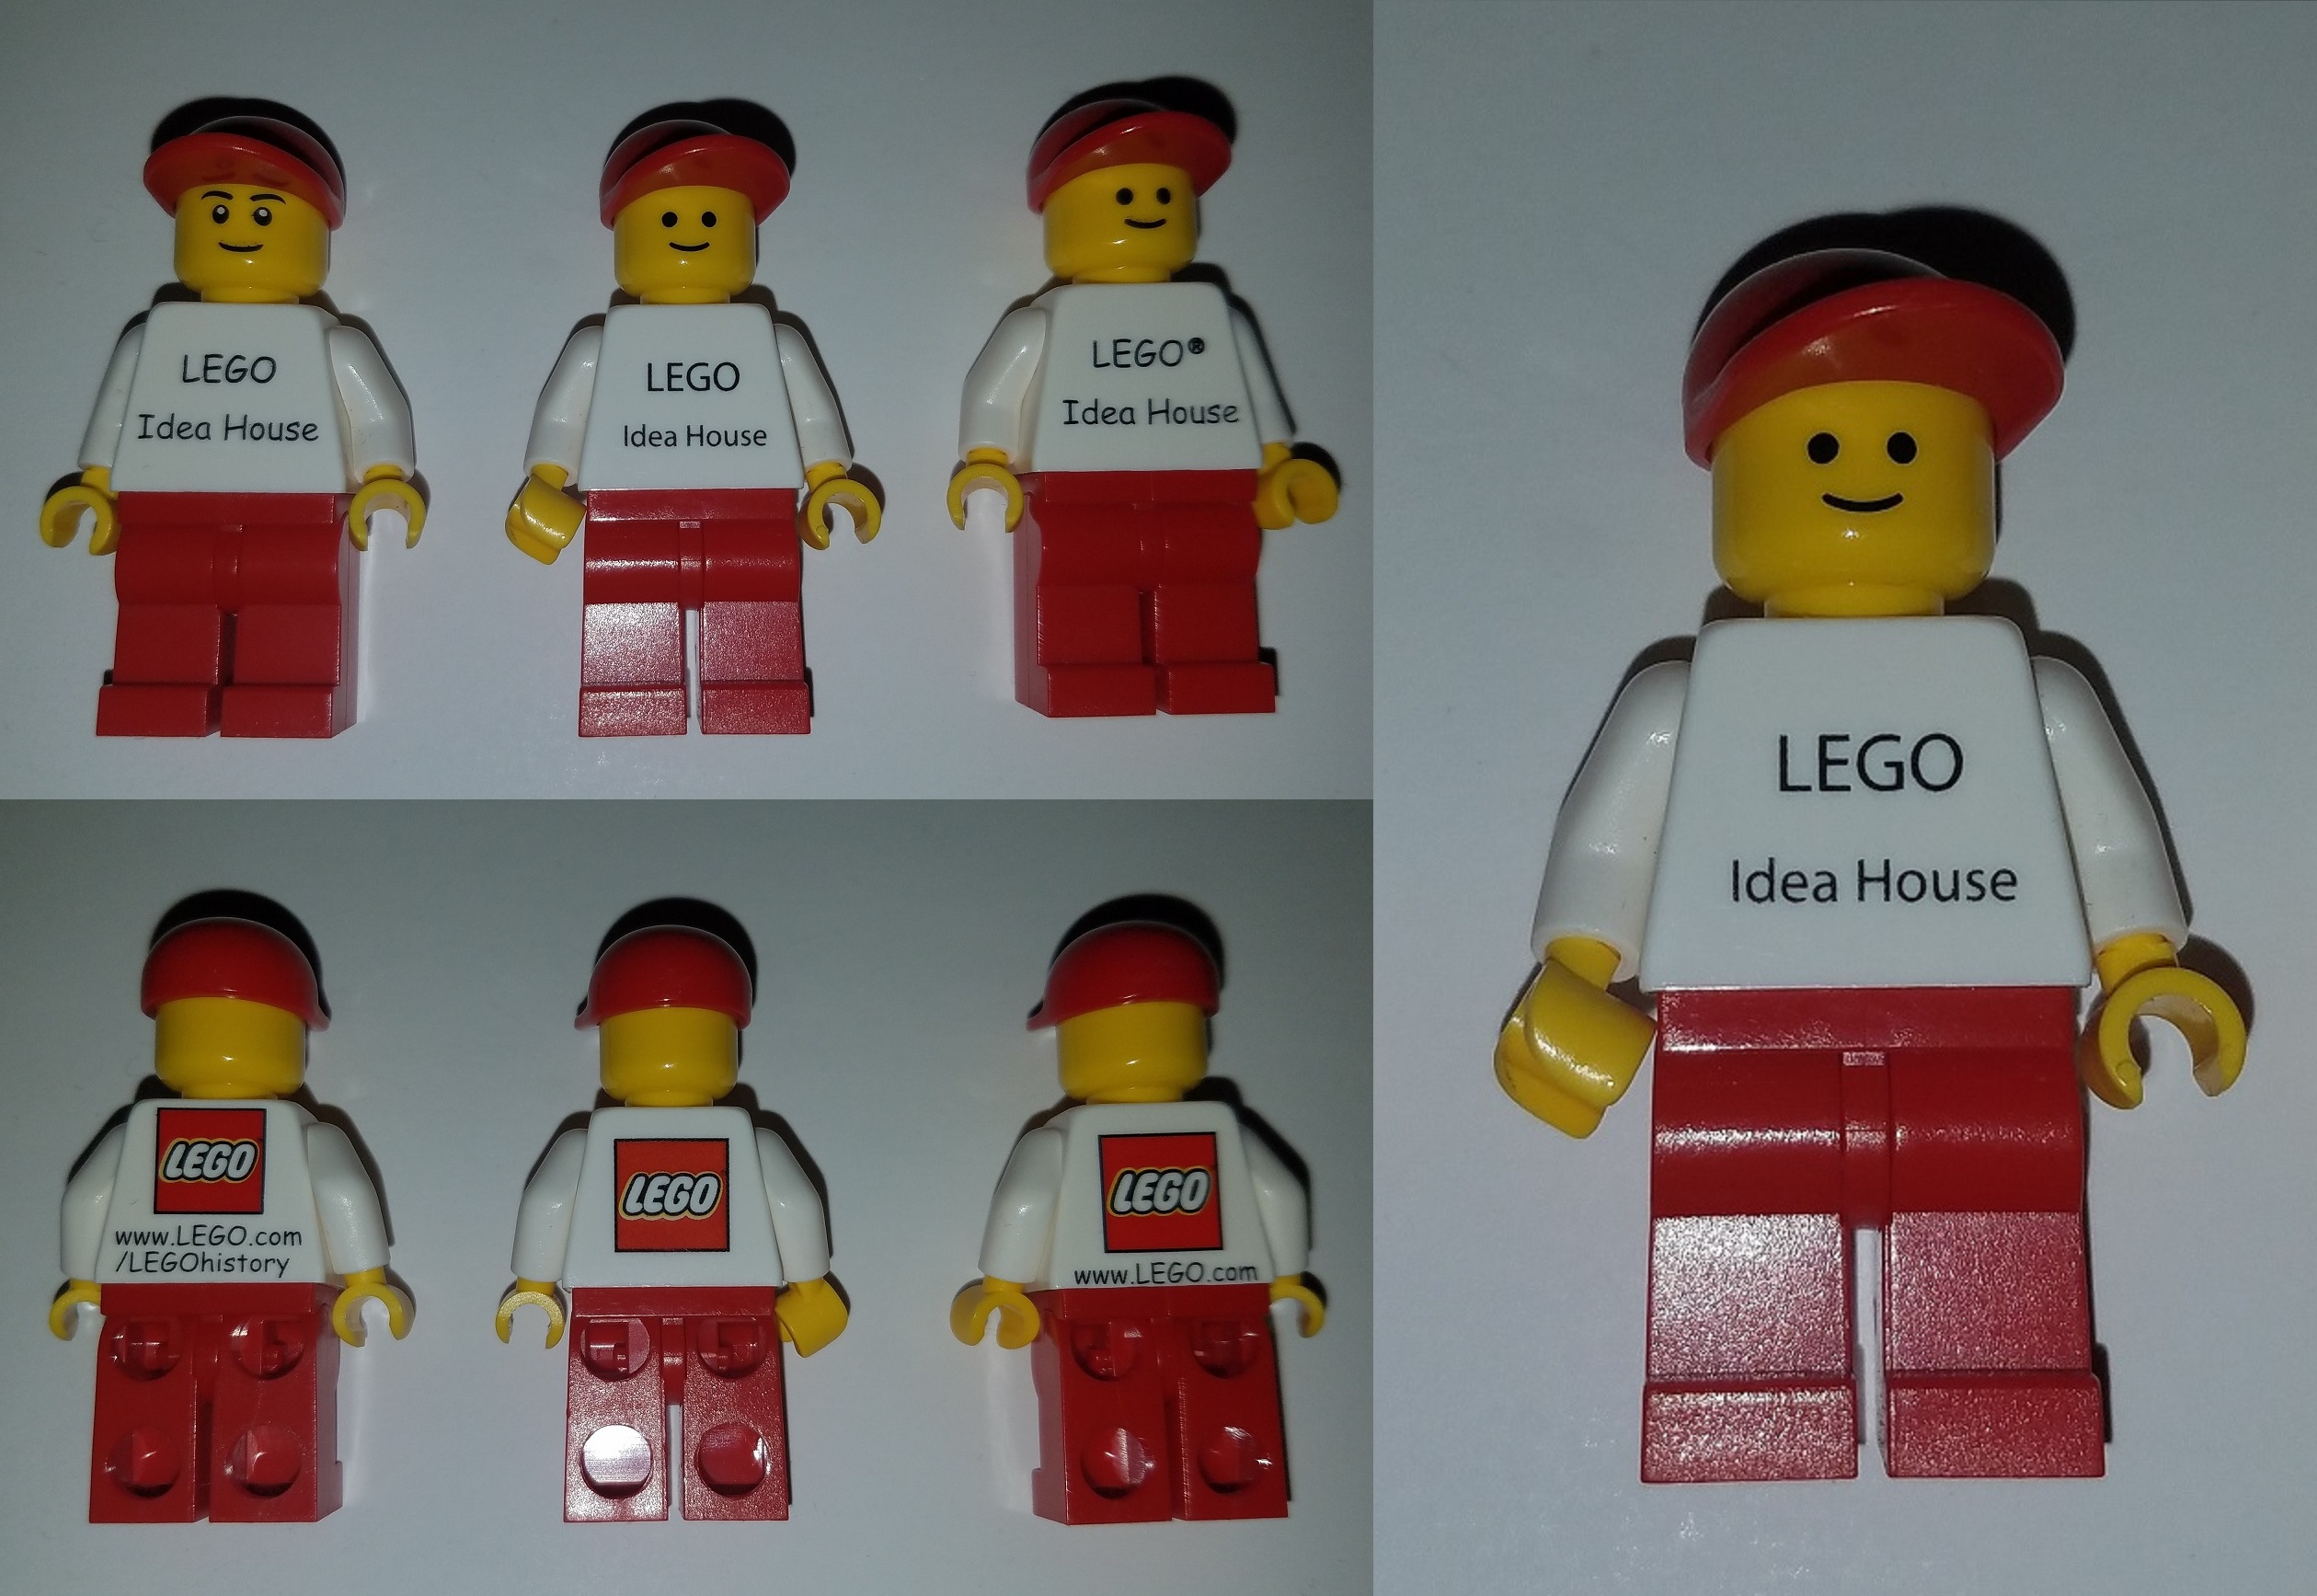 overdrive embargo propel Three Different Lego Idea House Minifigures - Minifigure Price Guide